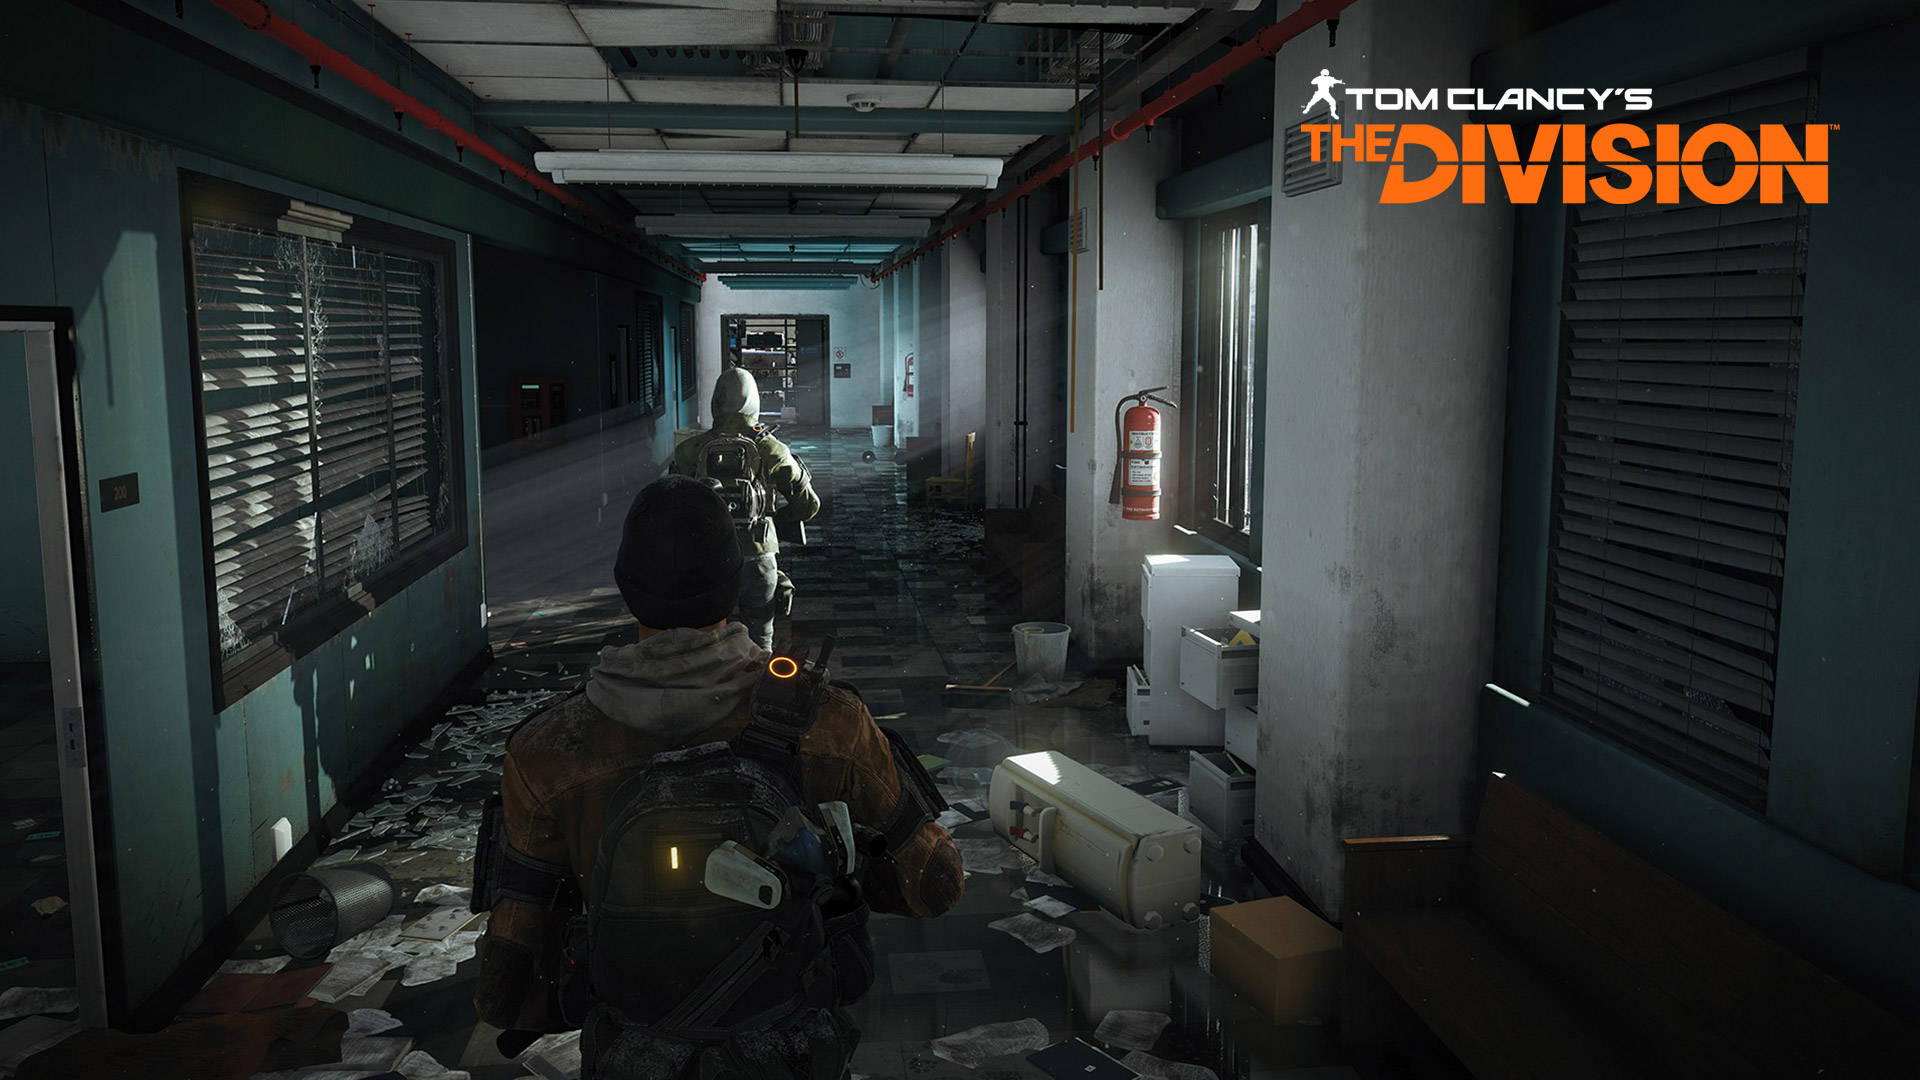 The Division Messy Office Background